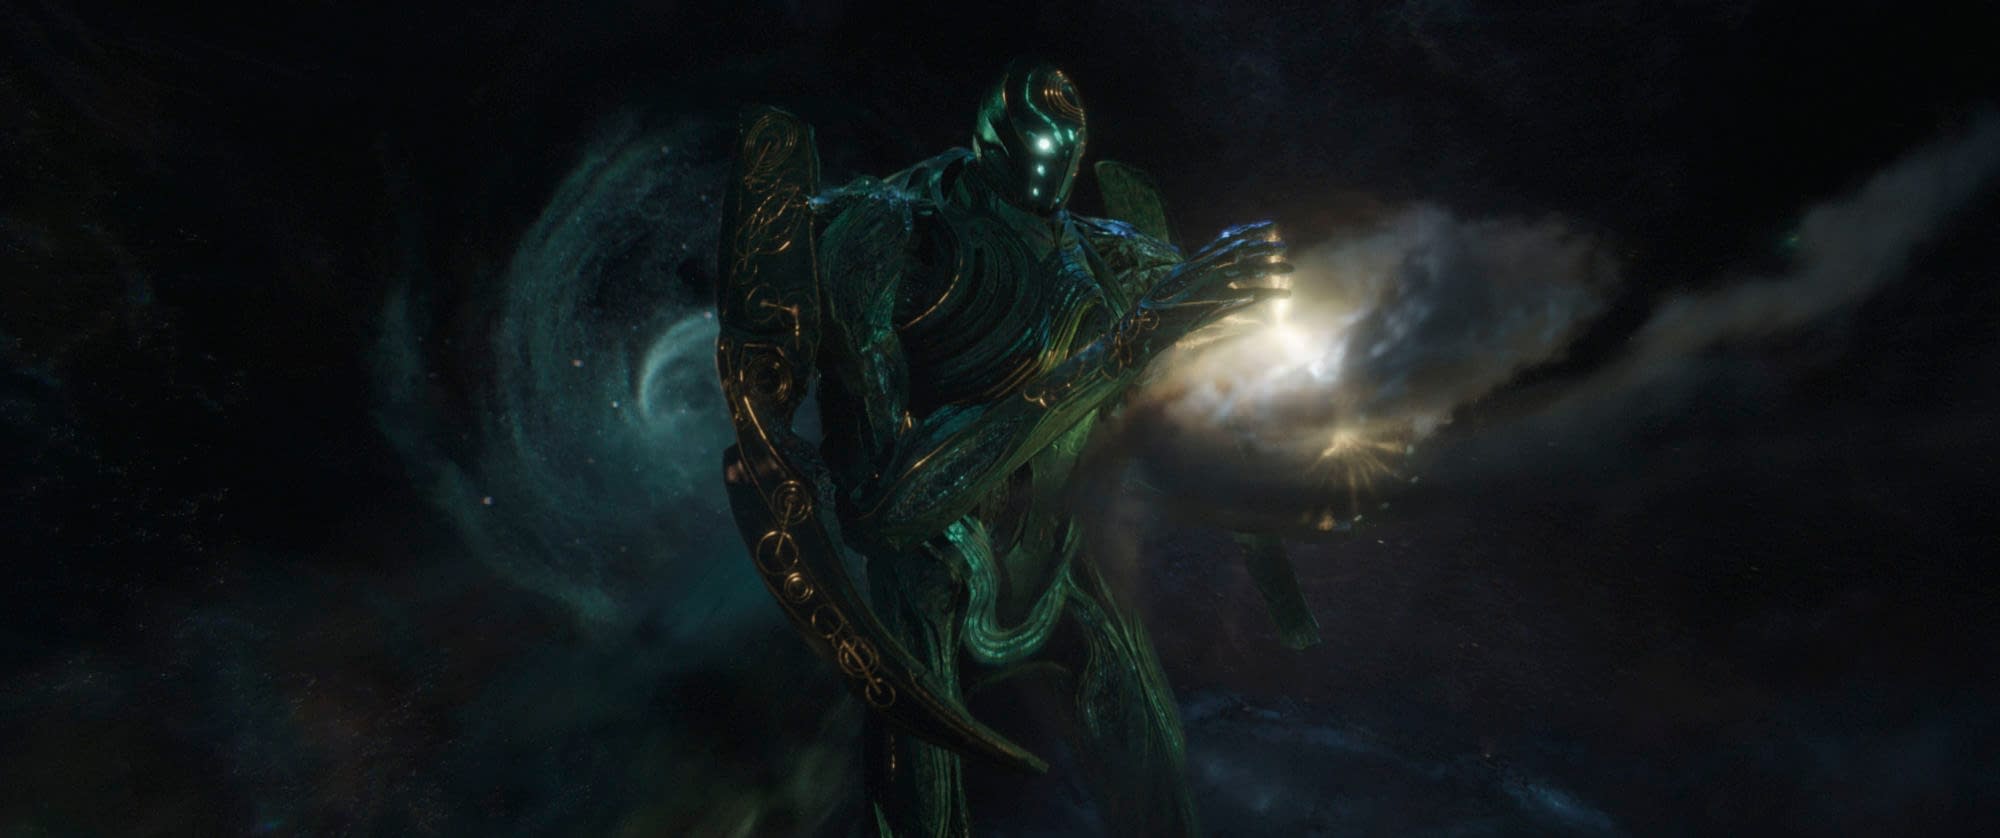 New High Quality Image From Eternals Shows Off The Celestials